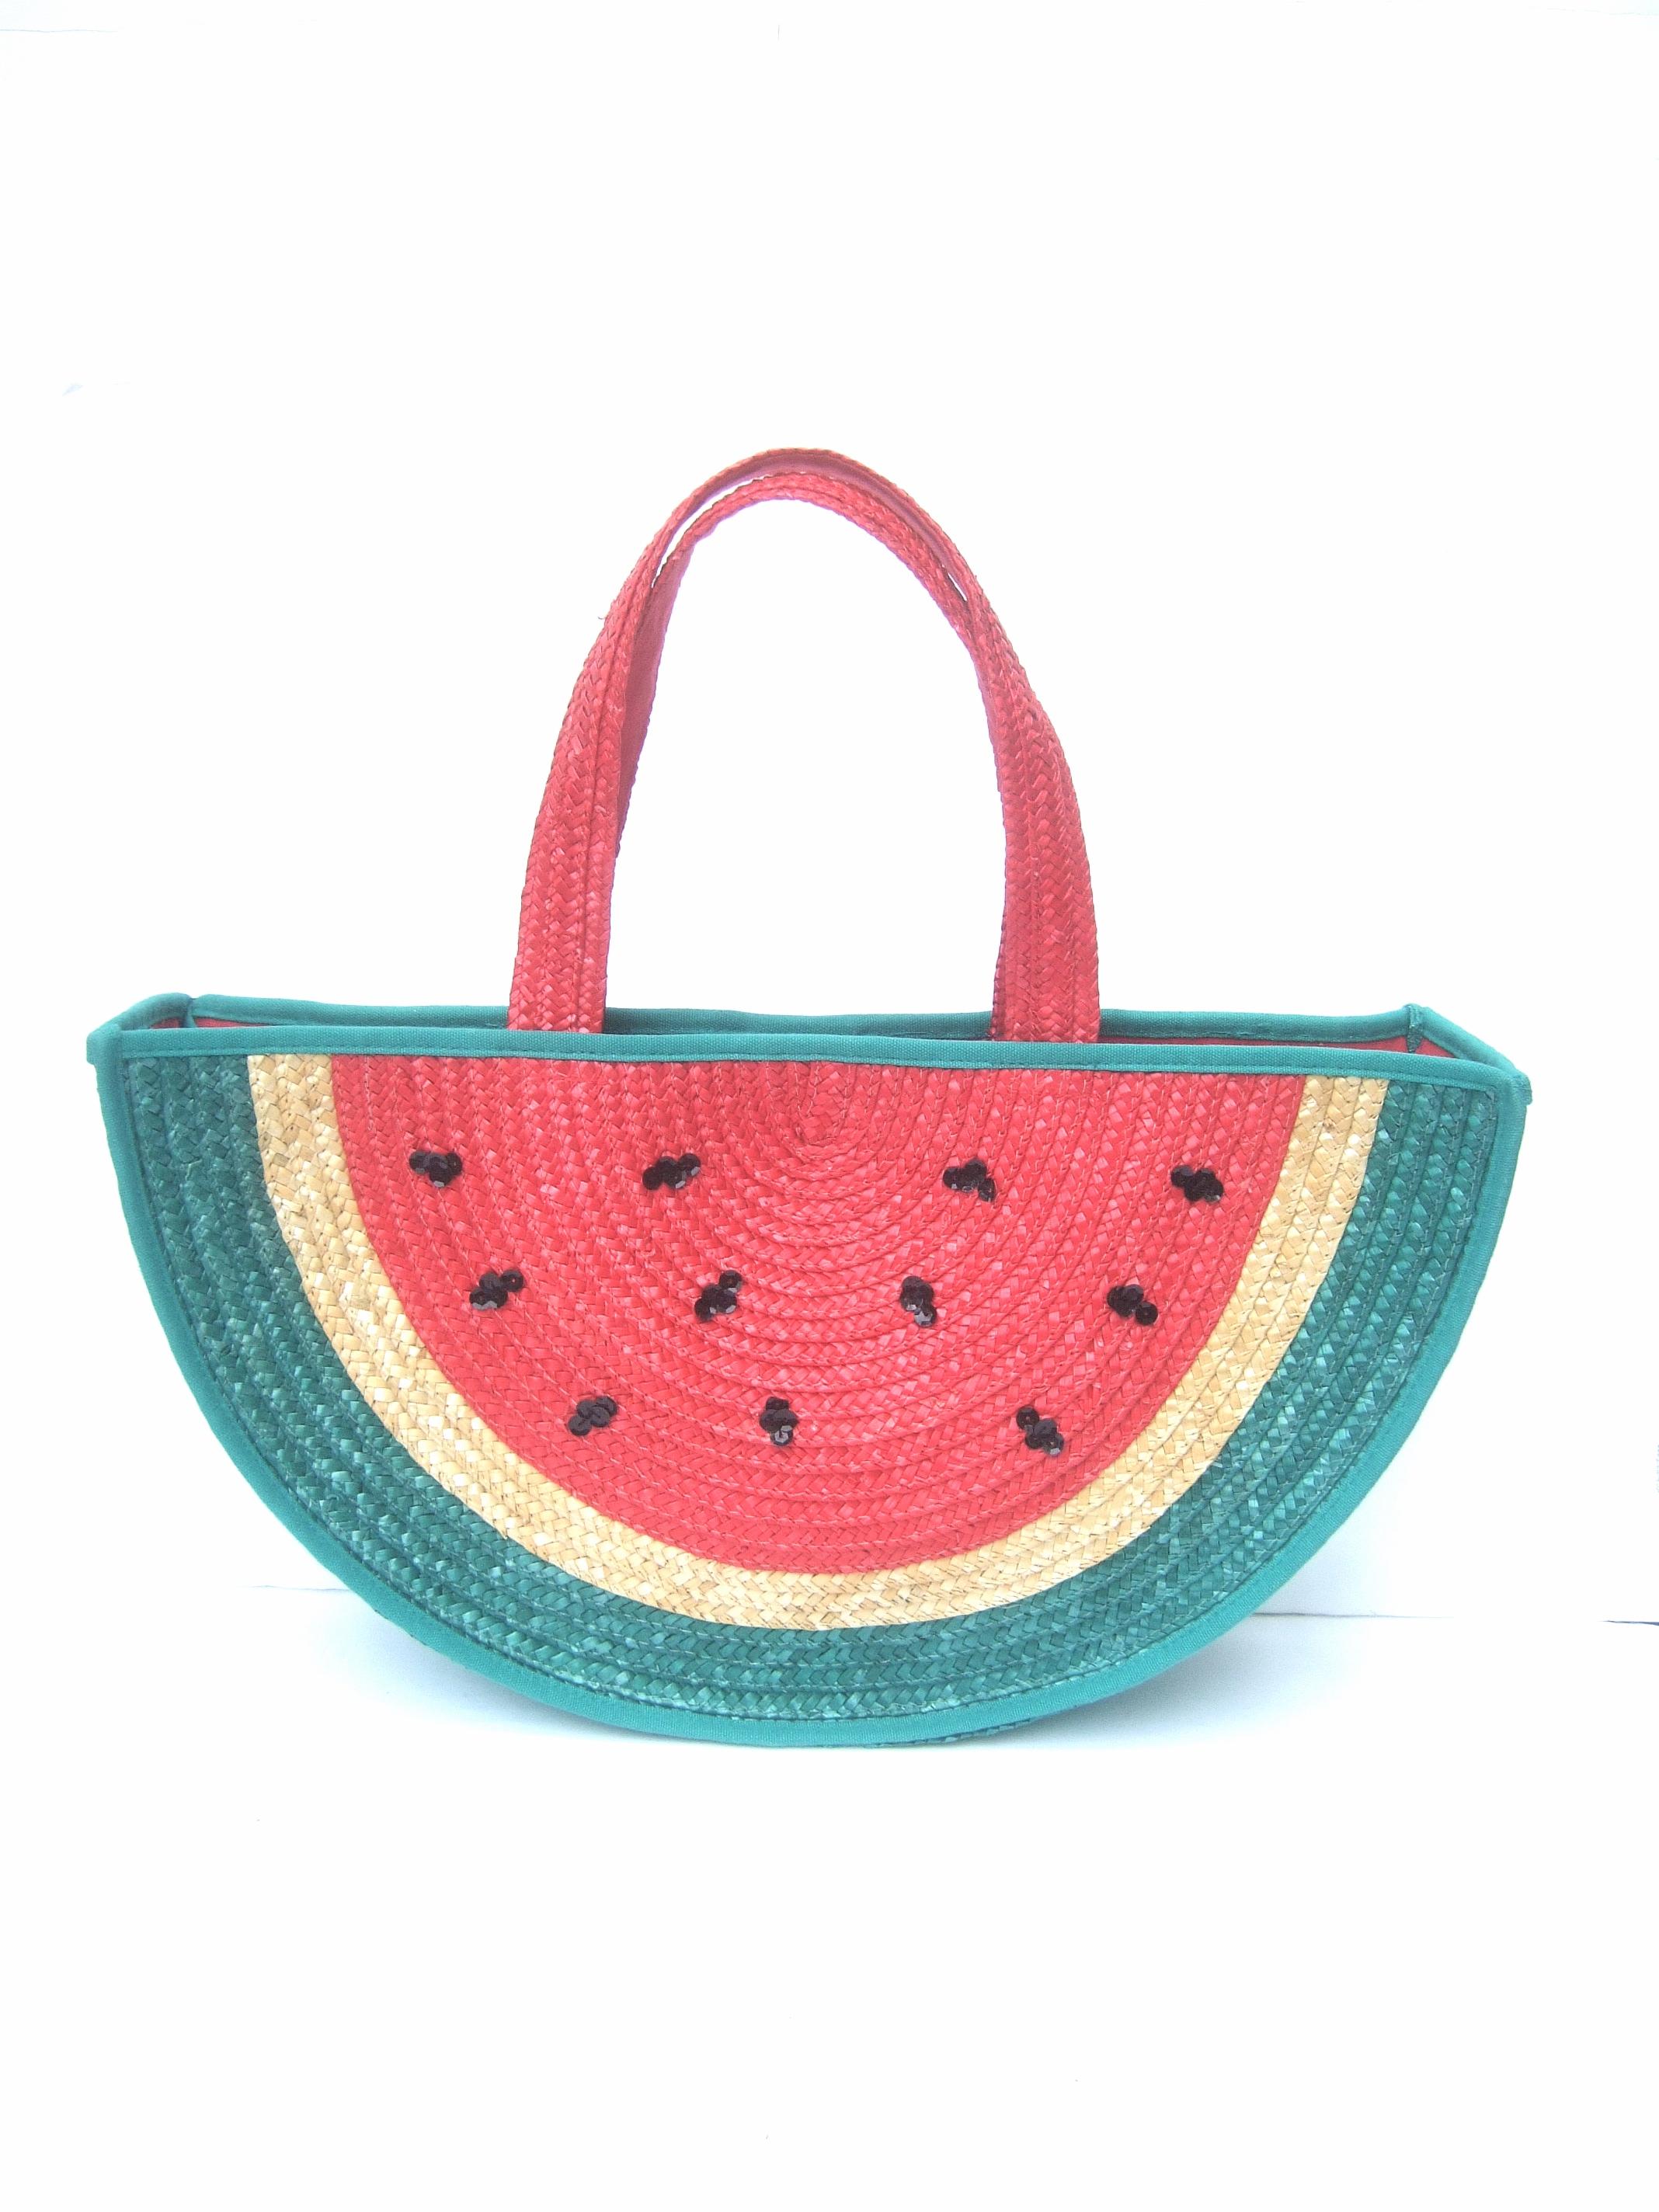 Lulu Guinness London Whimsical straw watermelon tote-handbag 
The fun summer large scale tote style handbag is designed
with red and green panels of woven straw in the shape
of a watermelon

Accented with clusters of black sequins emulating